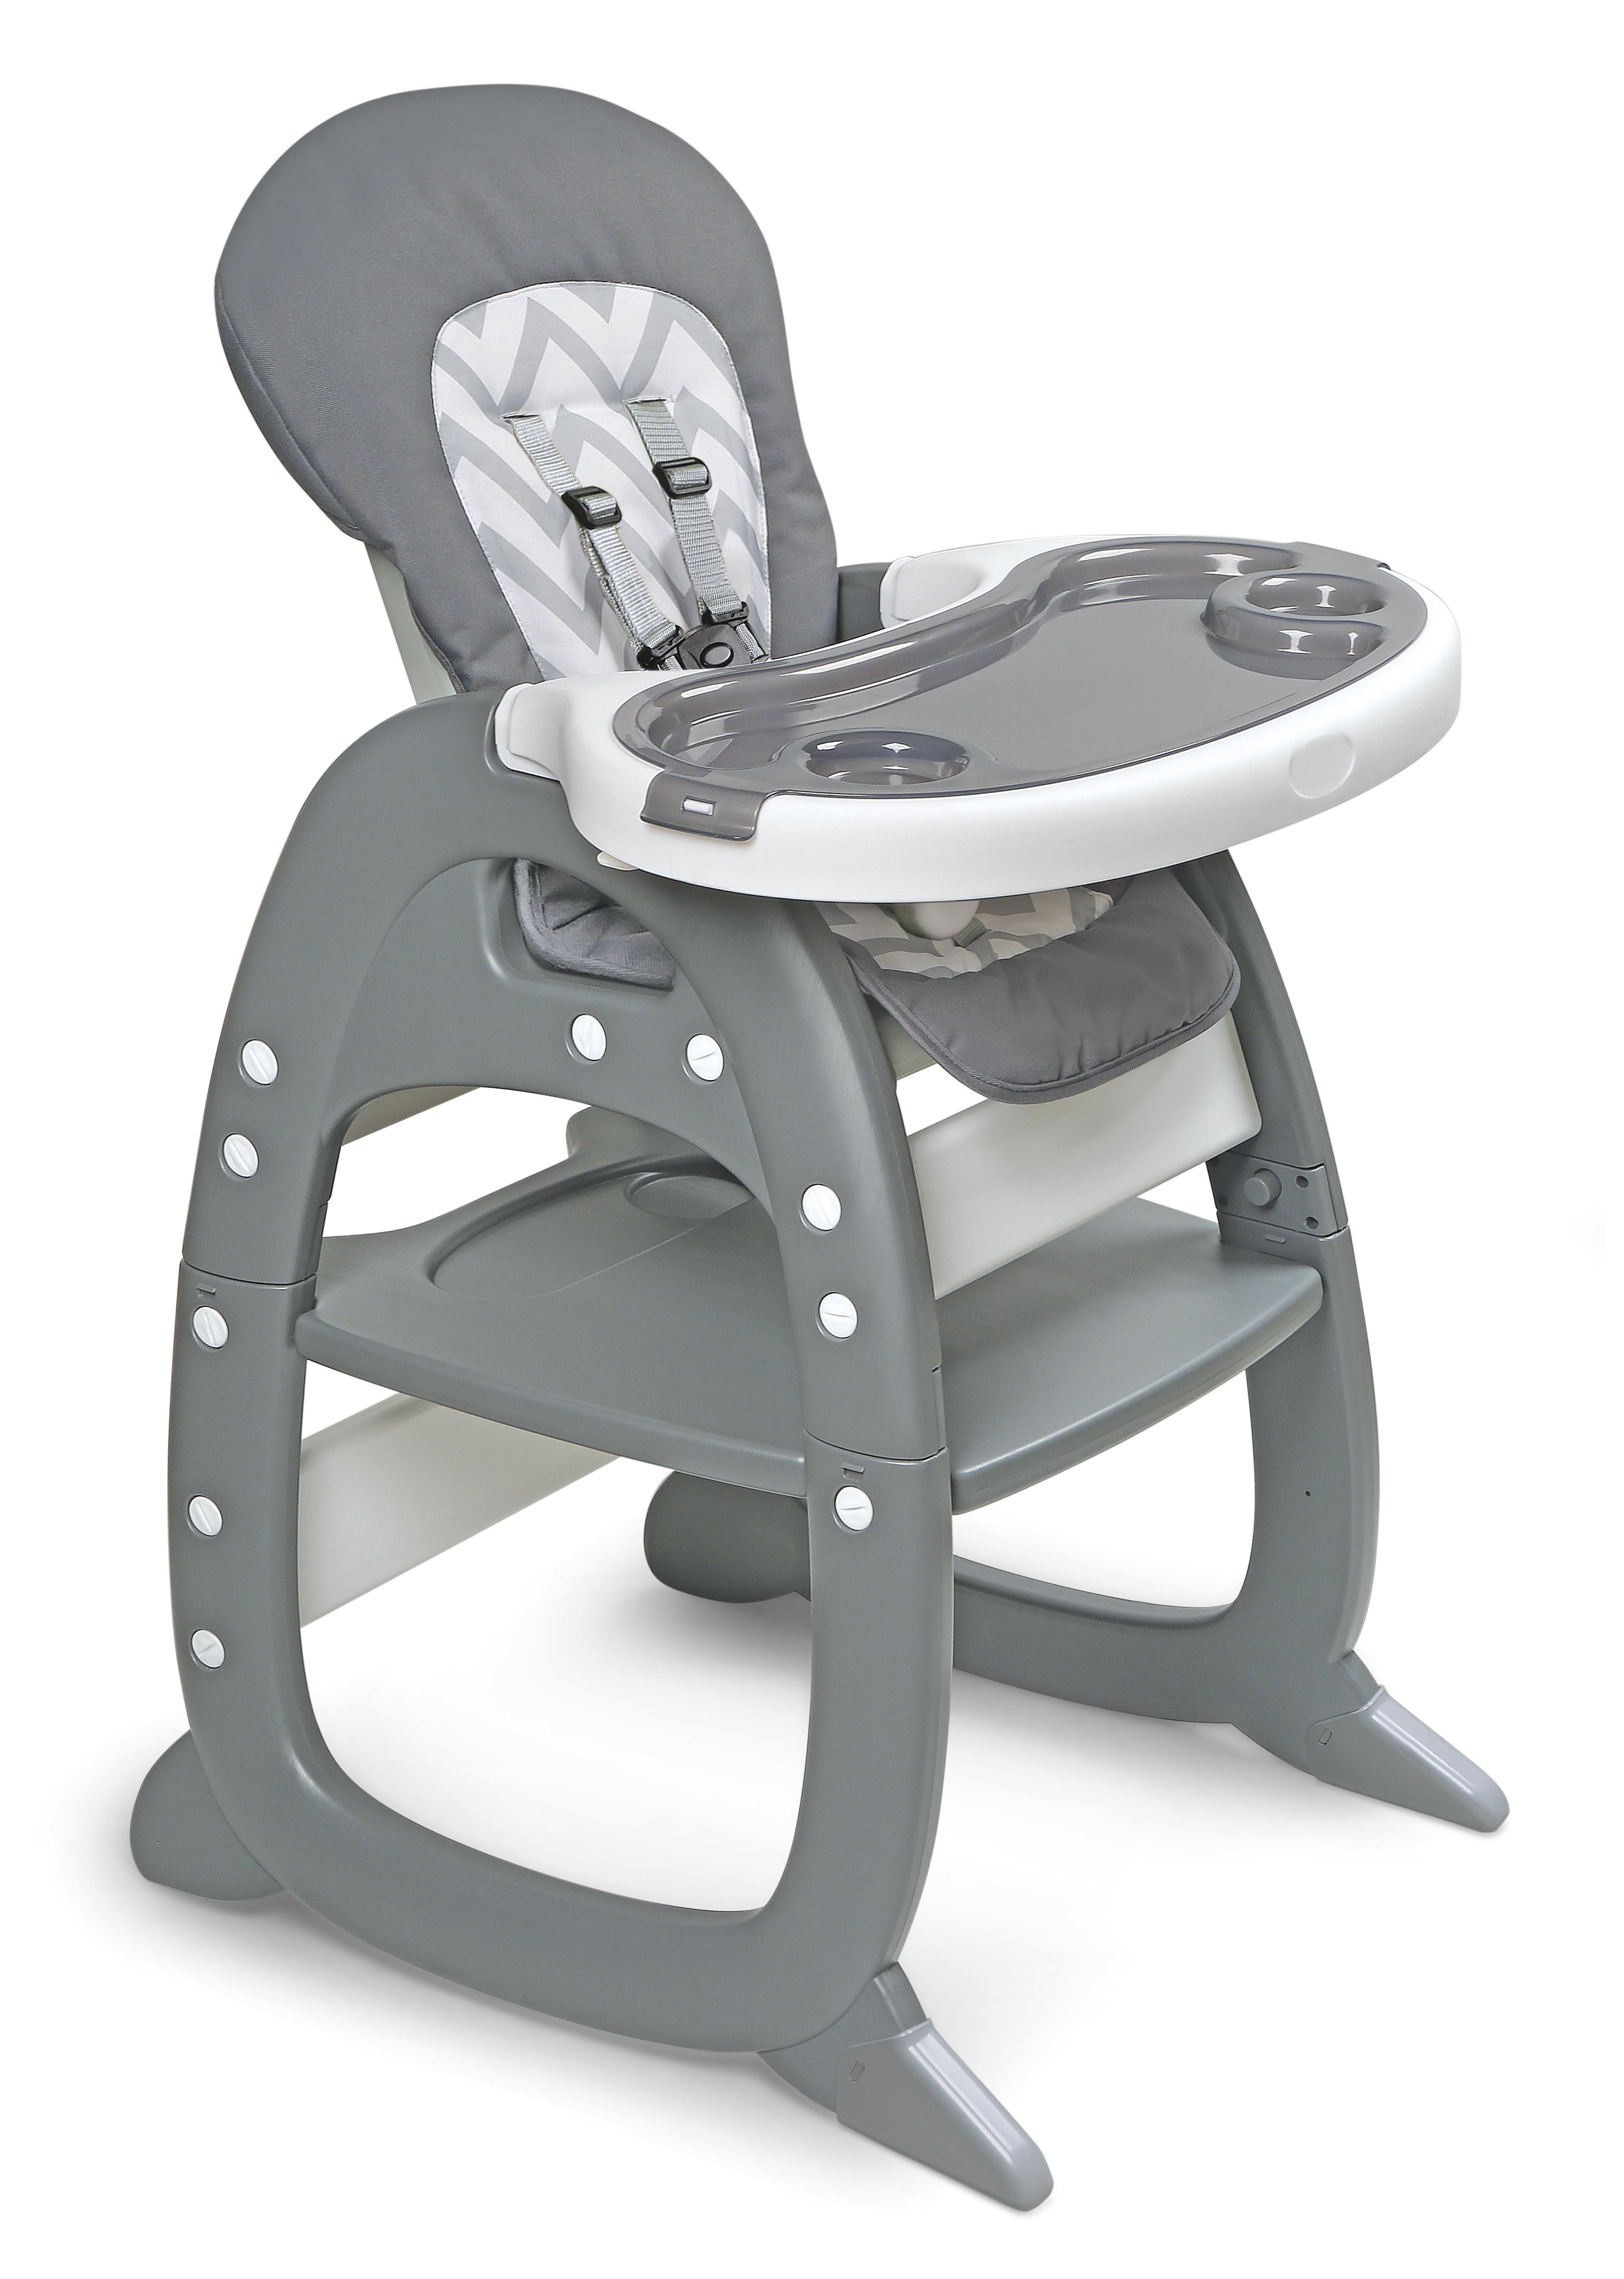 Envee II Baby High Chair with Playtable Conversion - Gray/Chevron